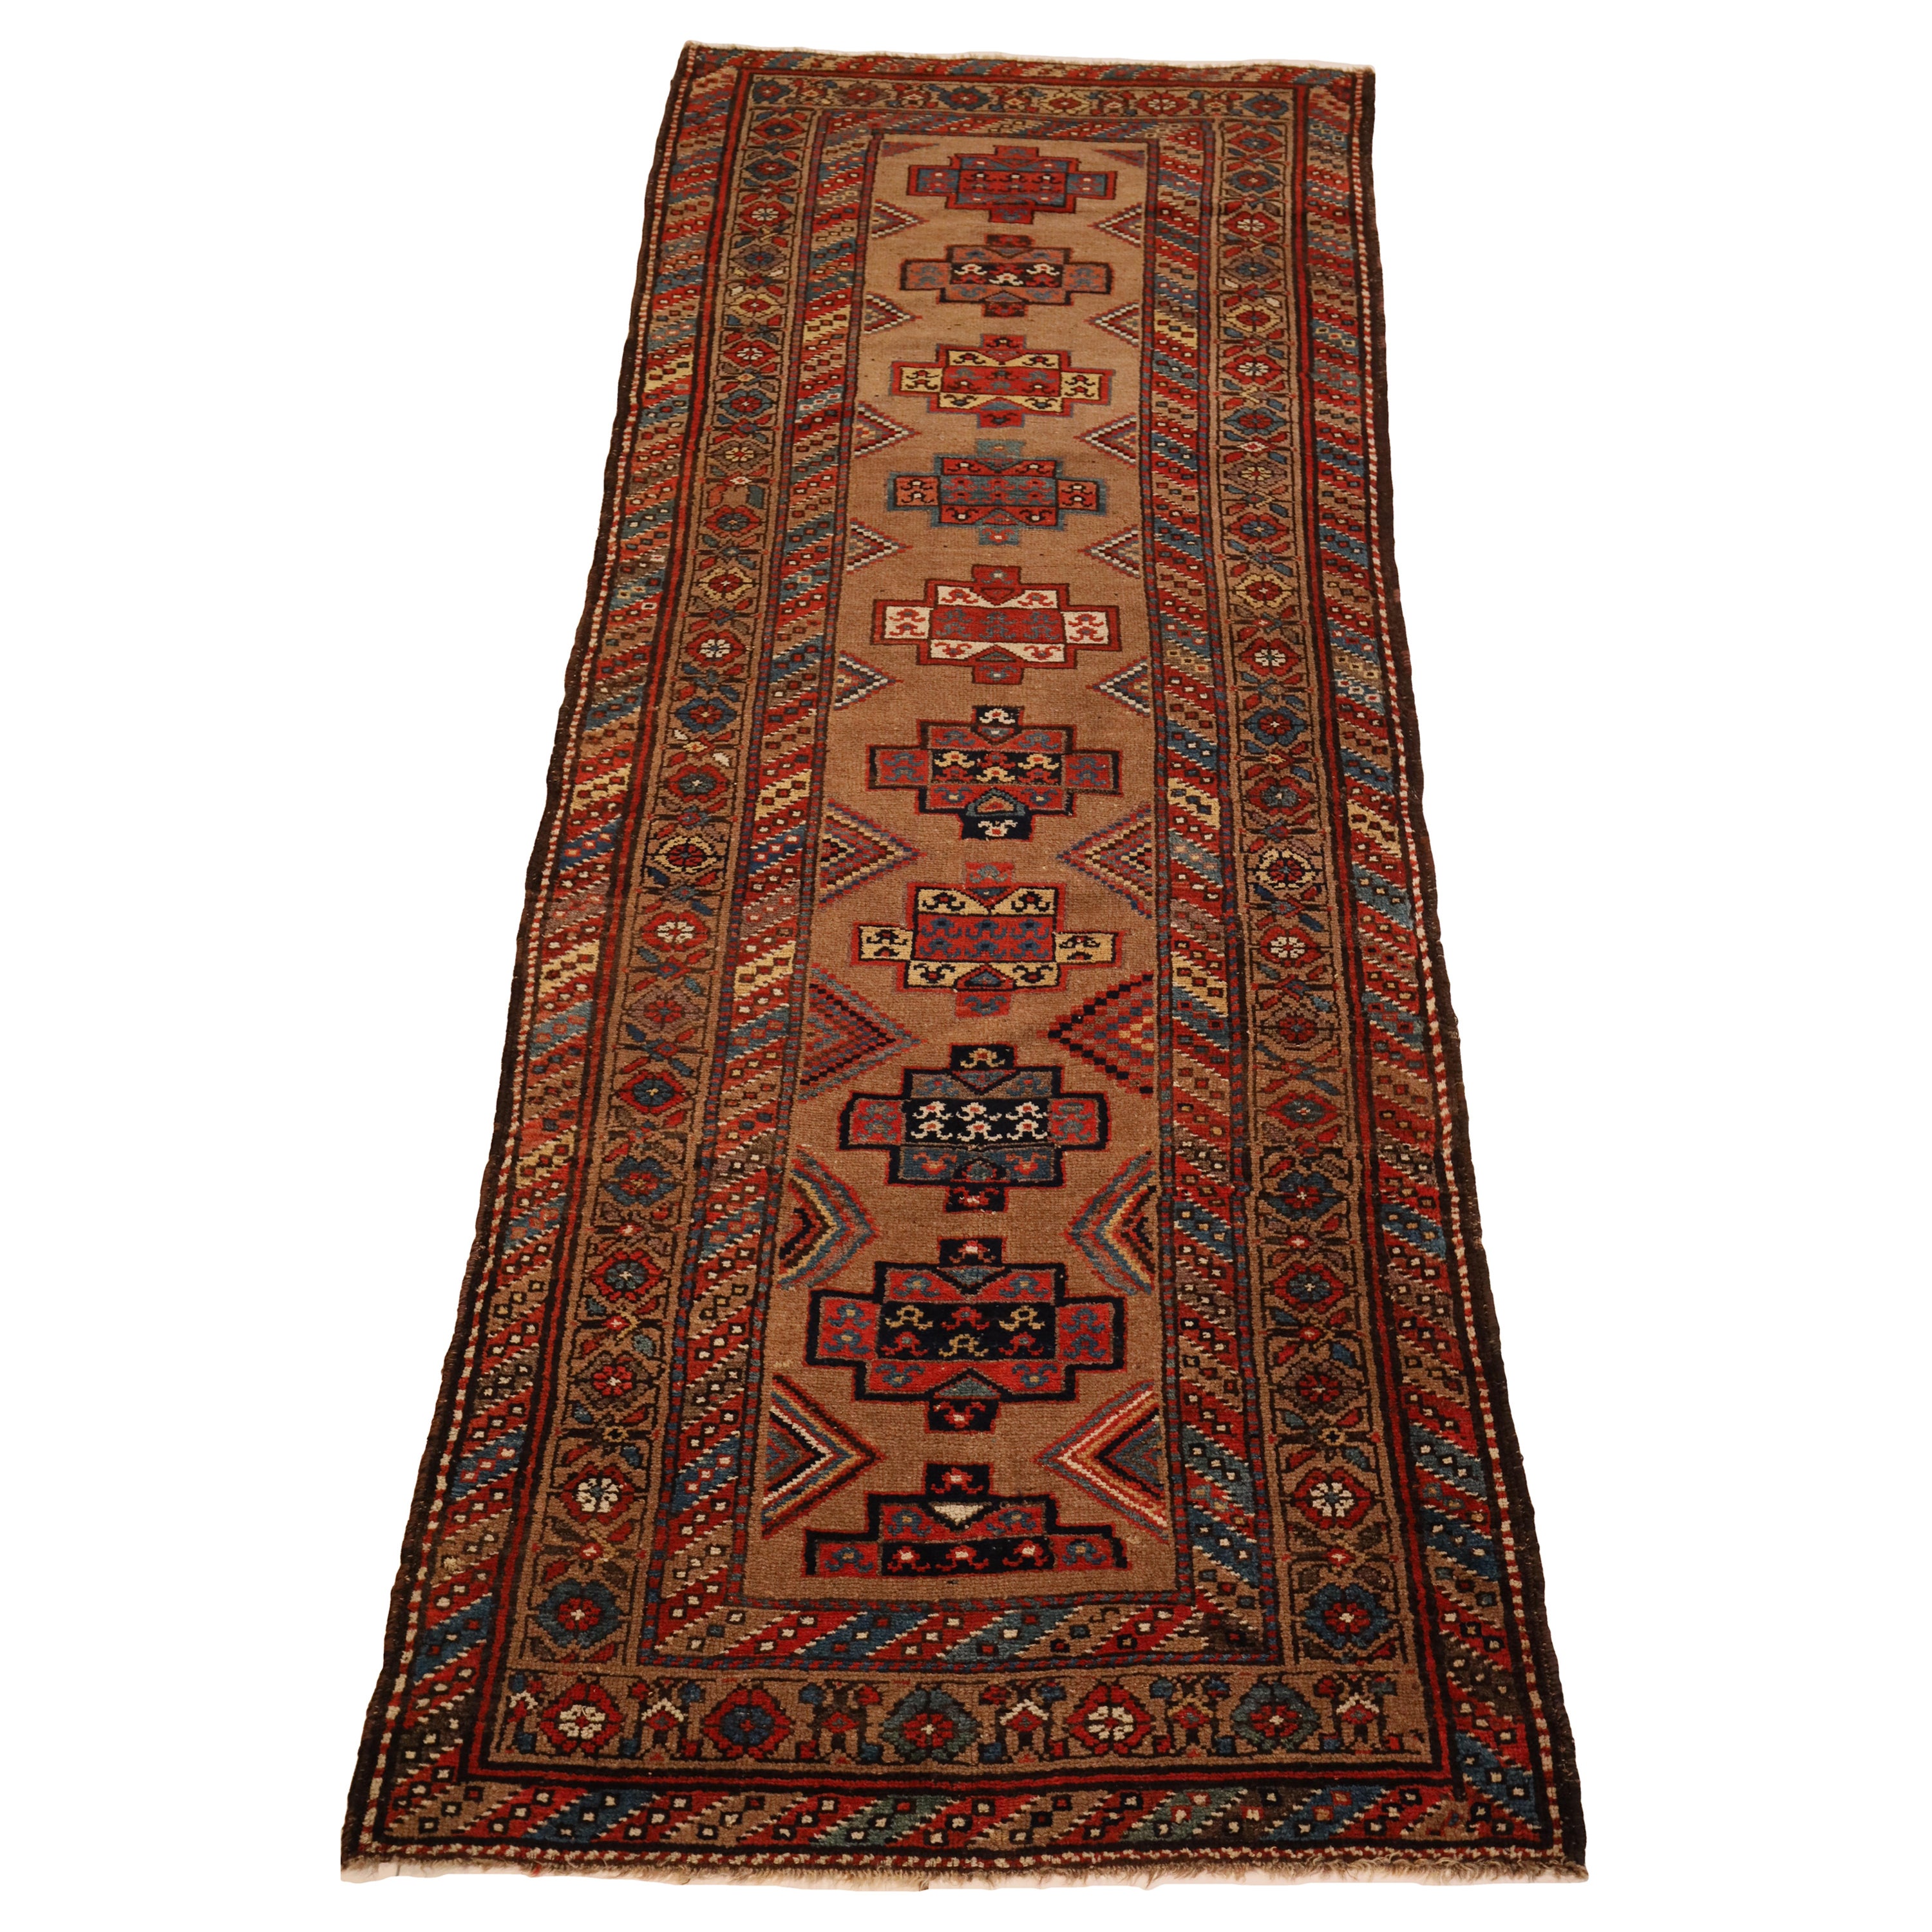 Camel-Hair Malayer Antique runner - 3'5" x 9'0" For Sale